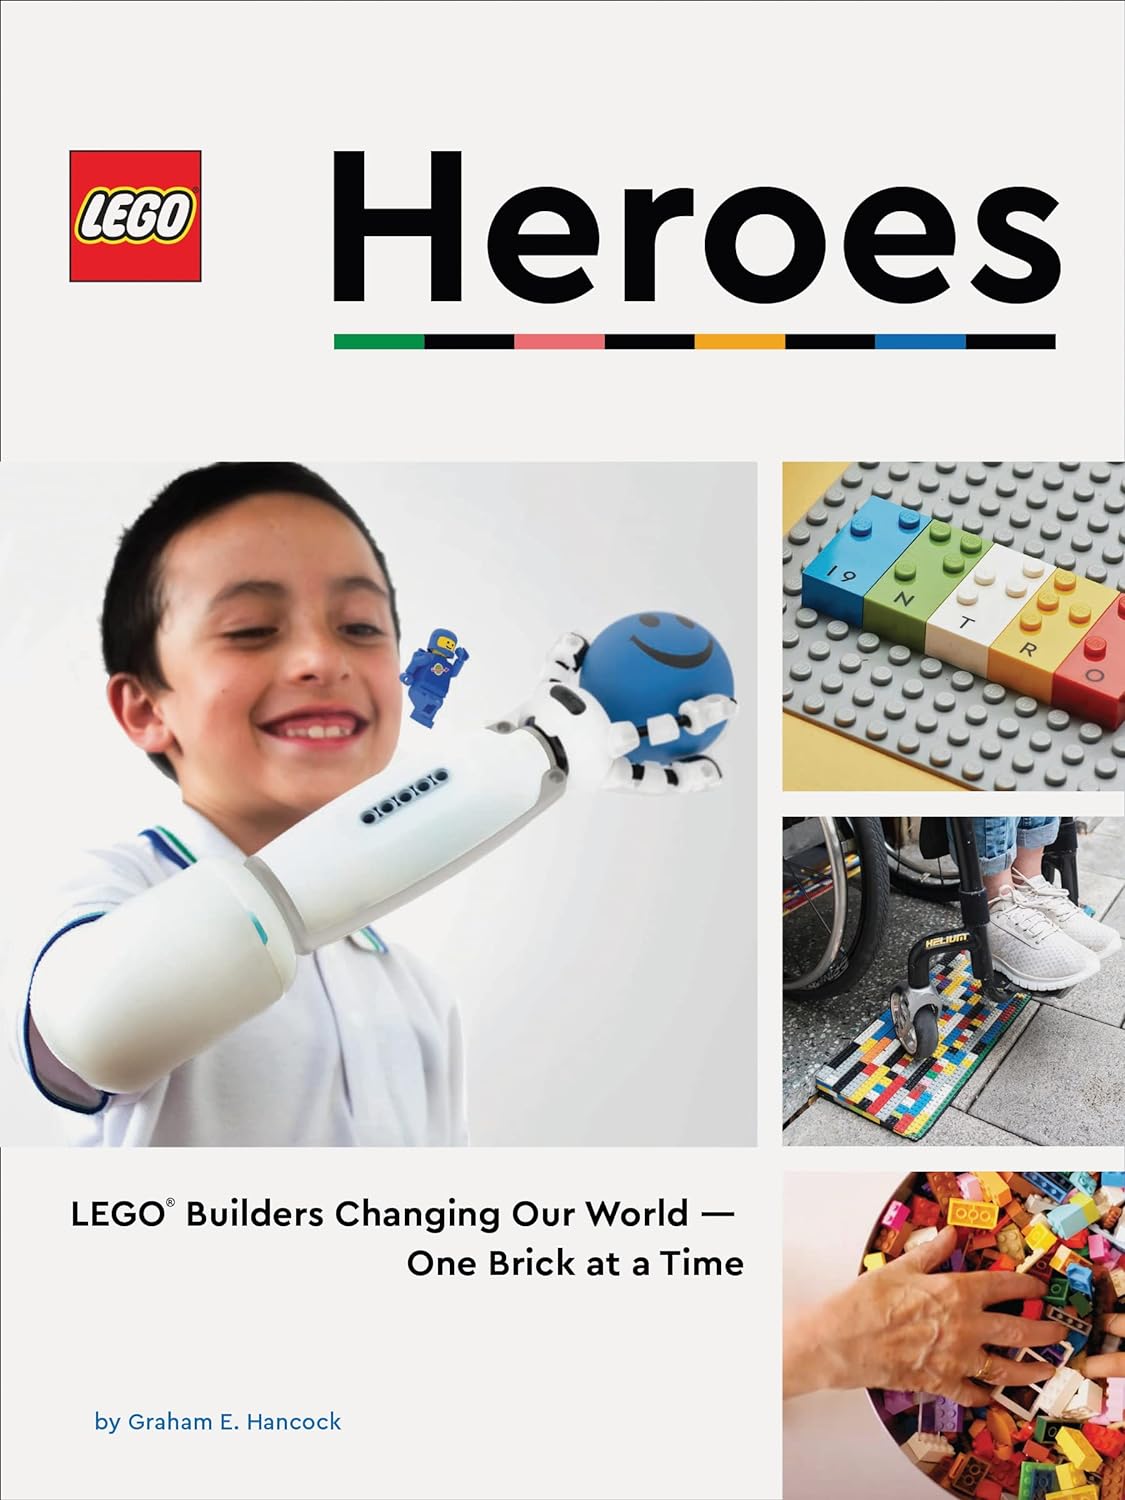 LEGO Heroes: Lego Builders Changing Our World-One Brick at a Time